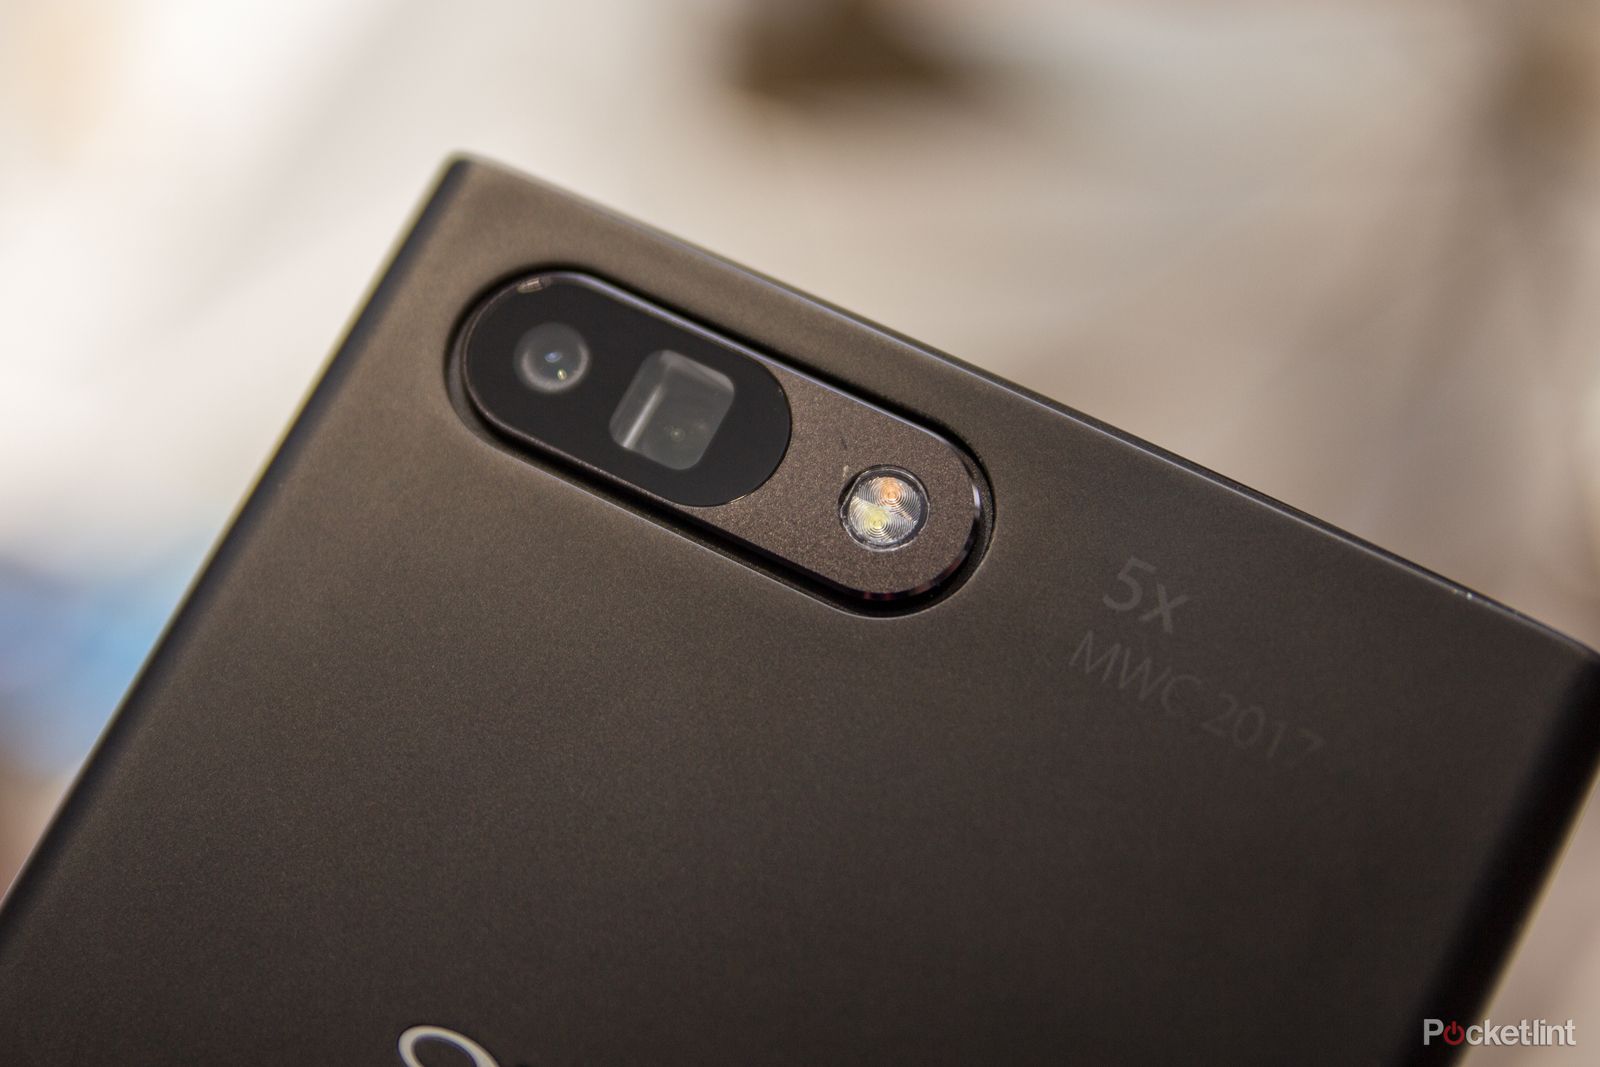 oppo s new 5x dual camera uses periscope technology to offer lossless zoom image 1